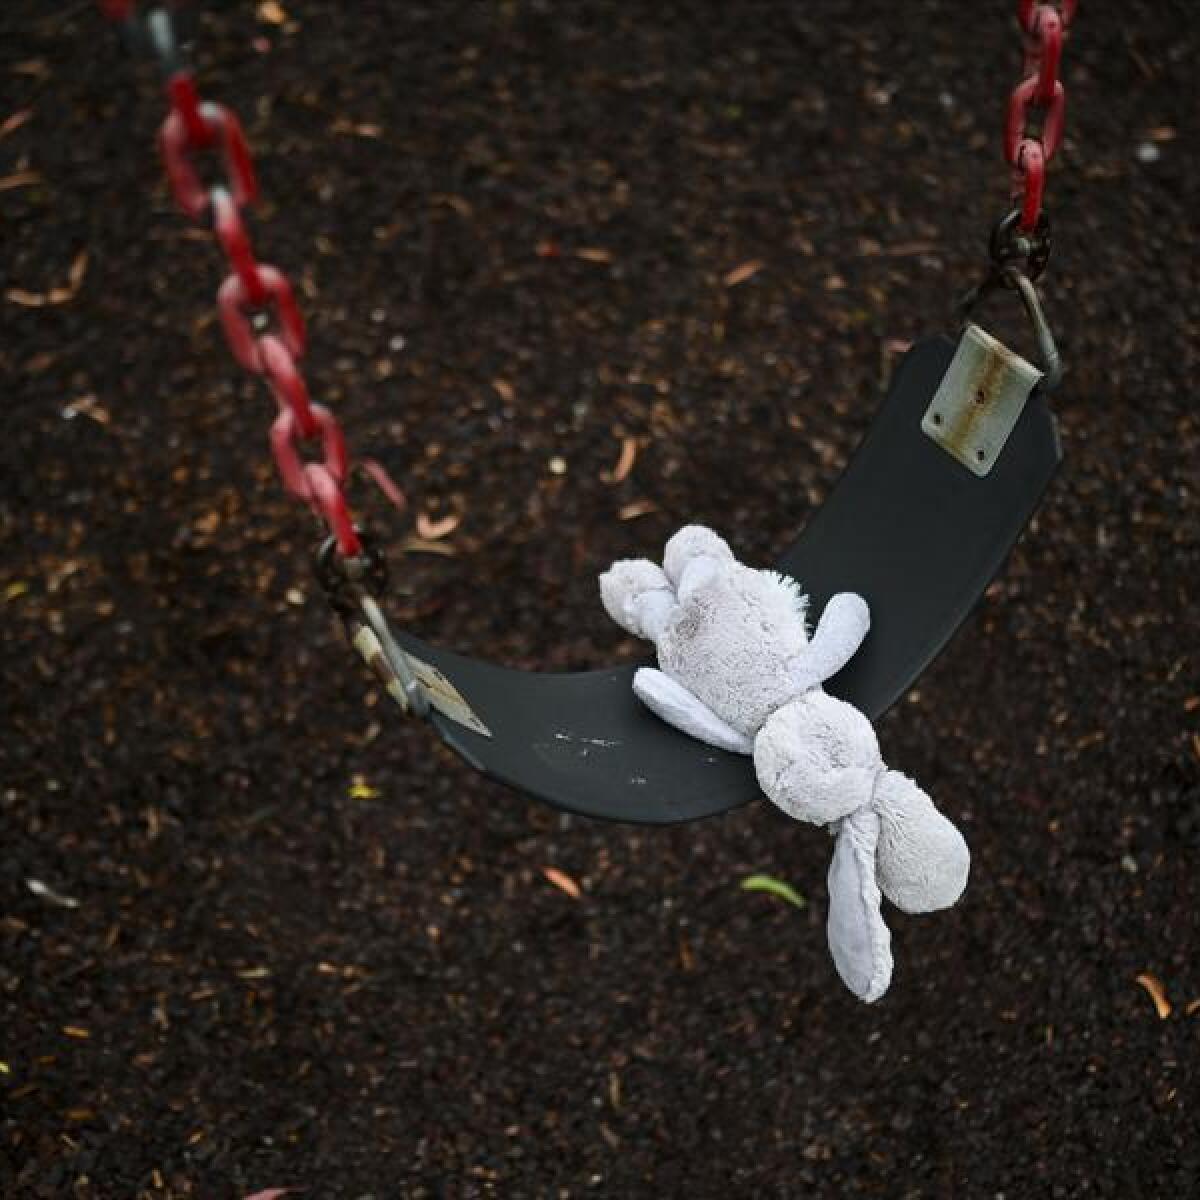 An abandoned childrenâ€™s toy is seen on a playground in Canberra